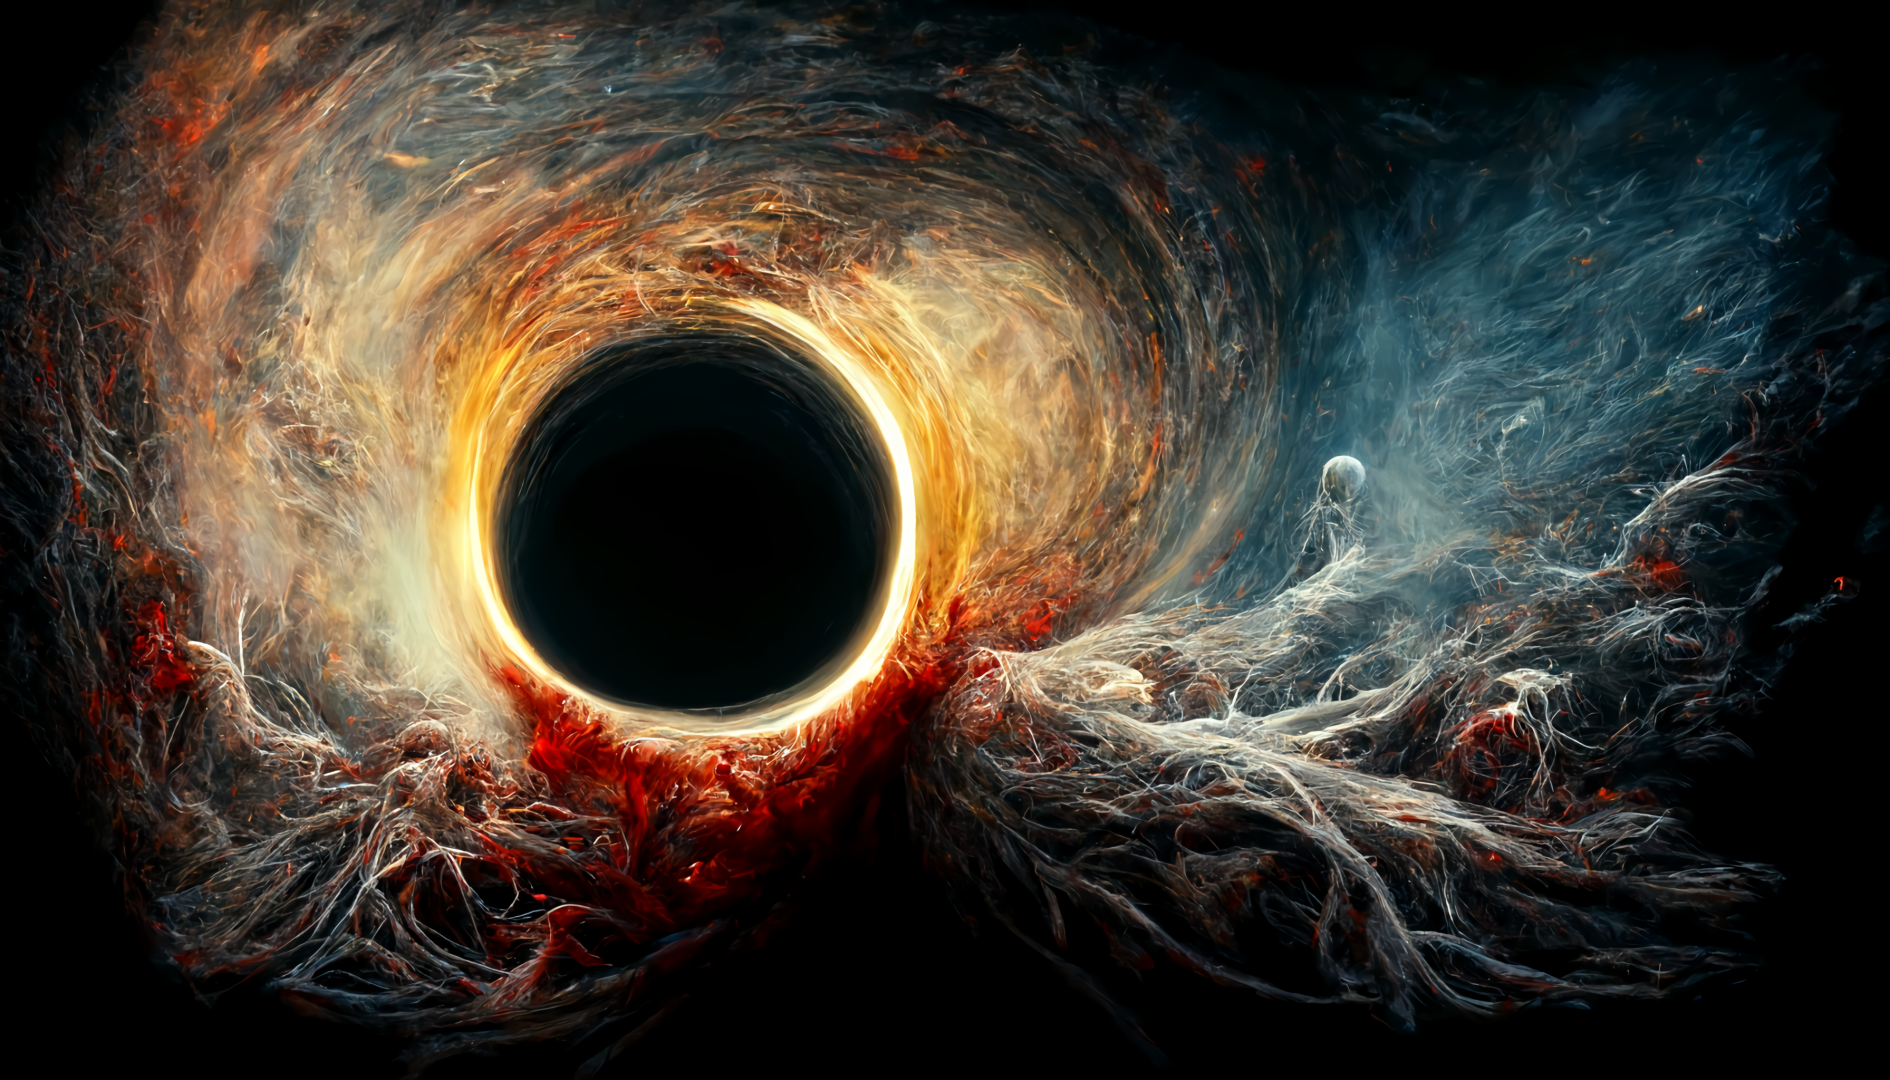 spaces_the_last_soul_in_the_universe_passes_through_the_black_h_839ee691-44fb-41e4-8c3b-cba0bf...png